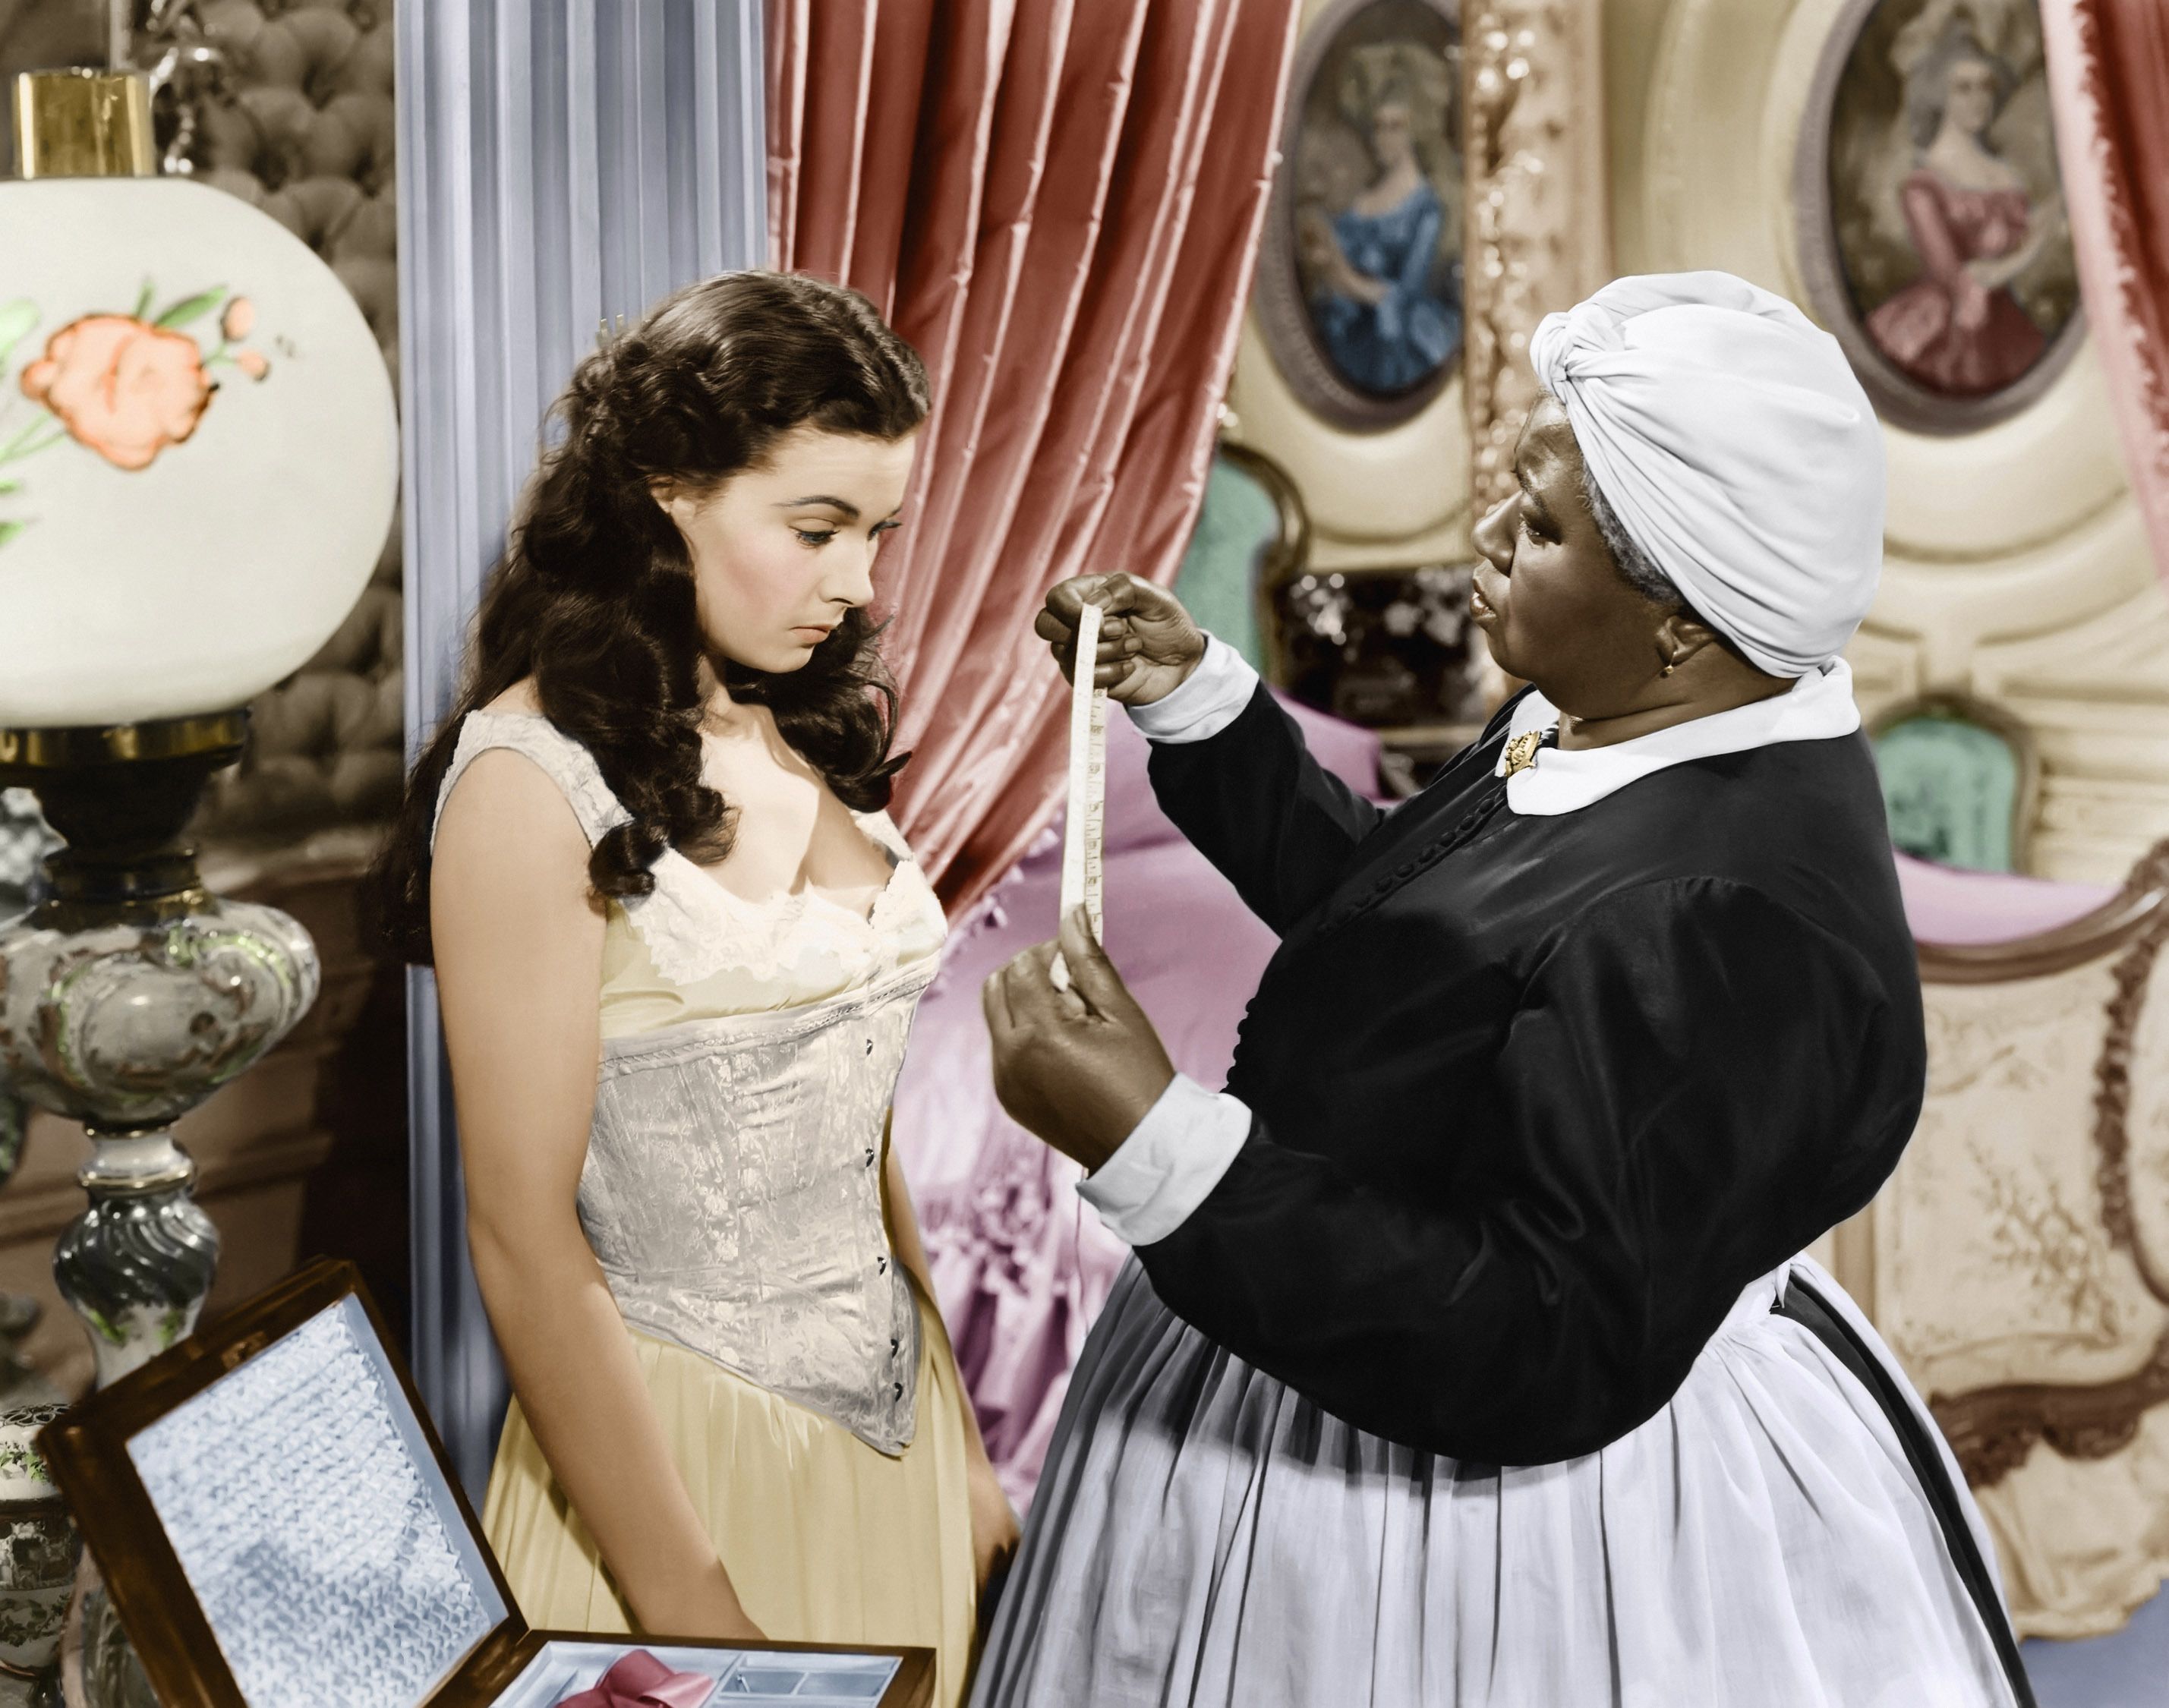 Why we love – and hate – 'Gone with the Wind' | CNN